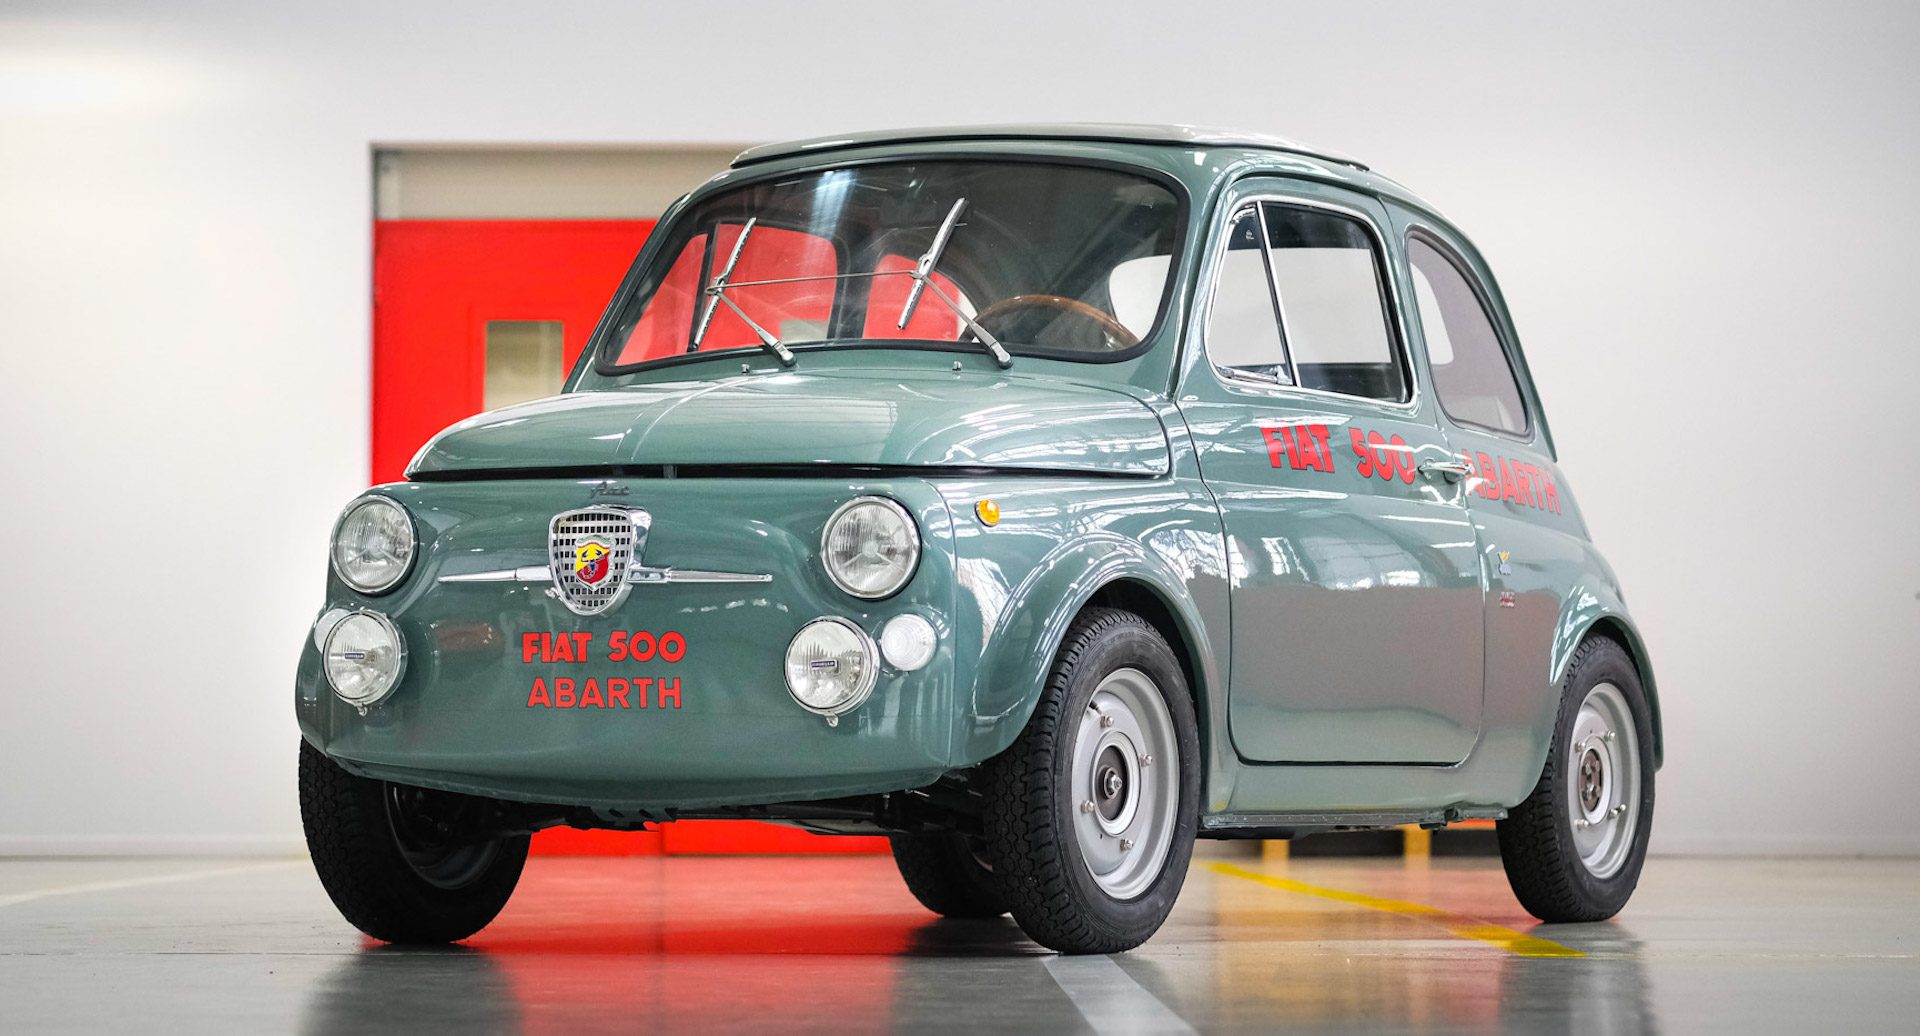 Abarth Classiche Celebrates 100 Years Of Monza Circuit With Fiat 